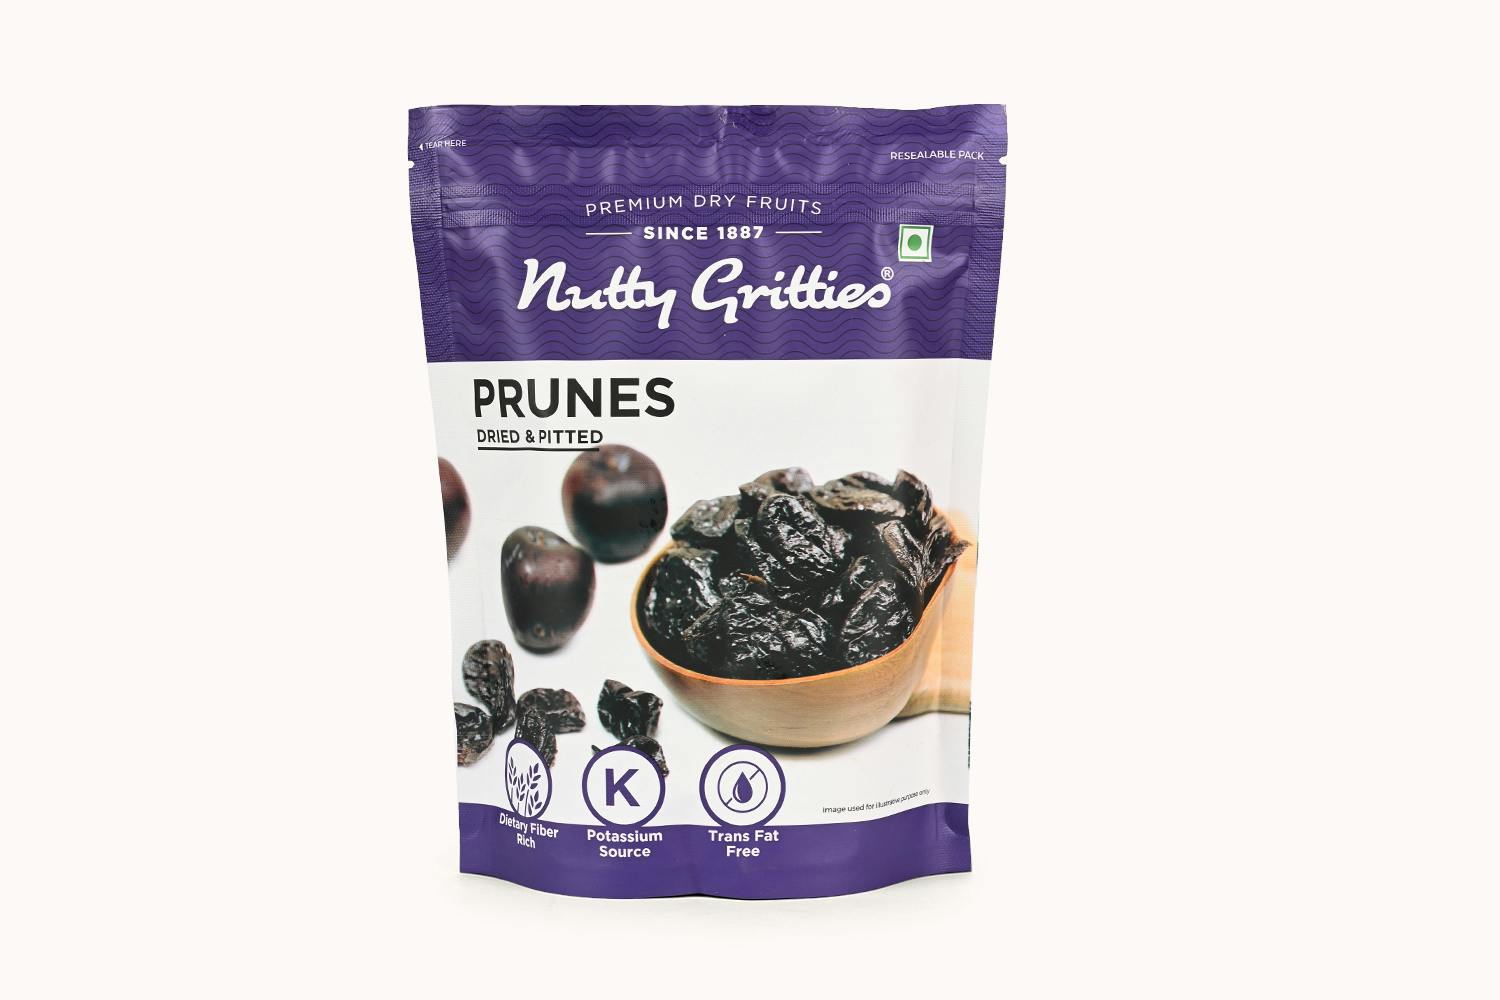 Nutty Gritties California Pitted Prunes